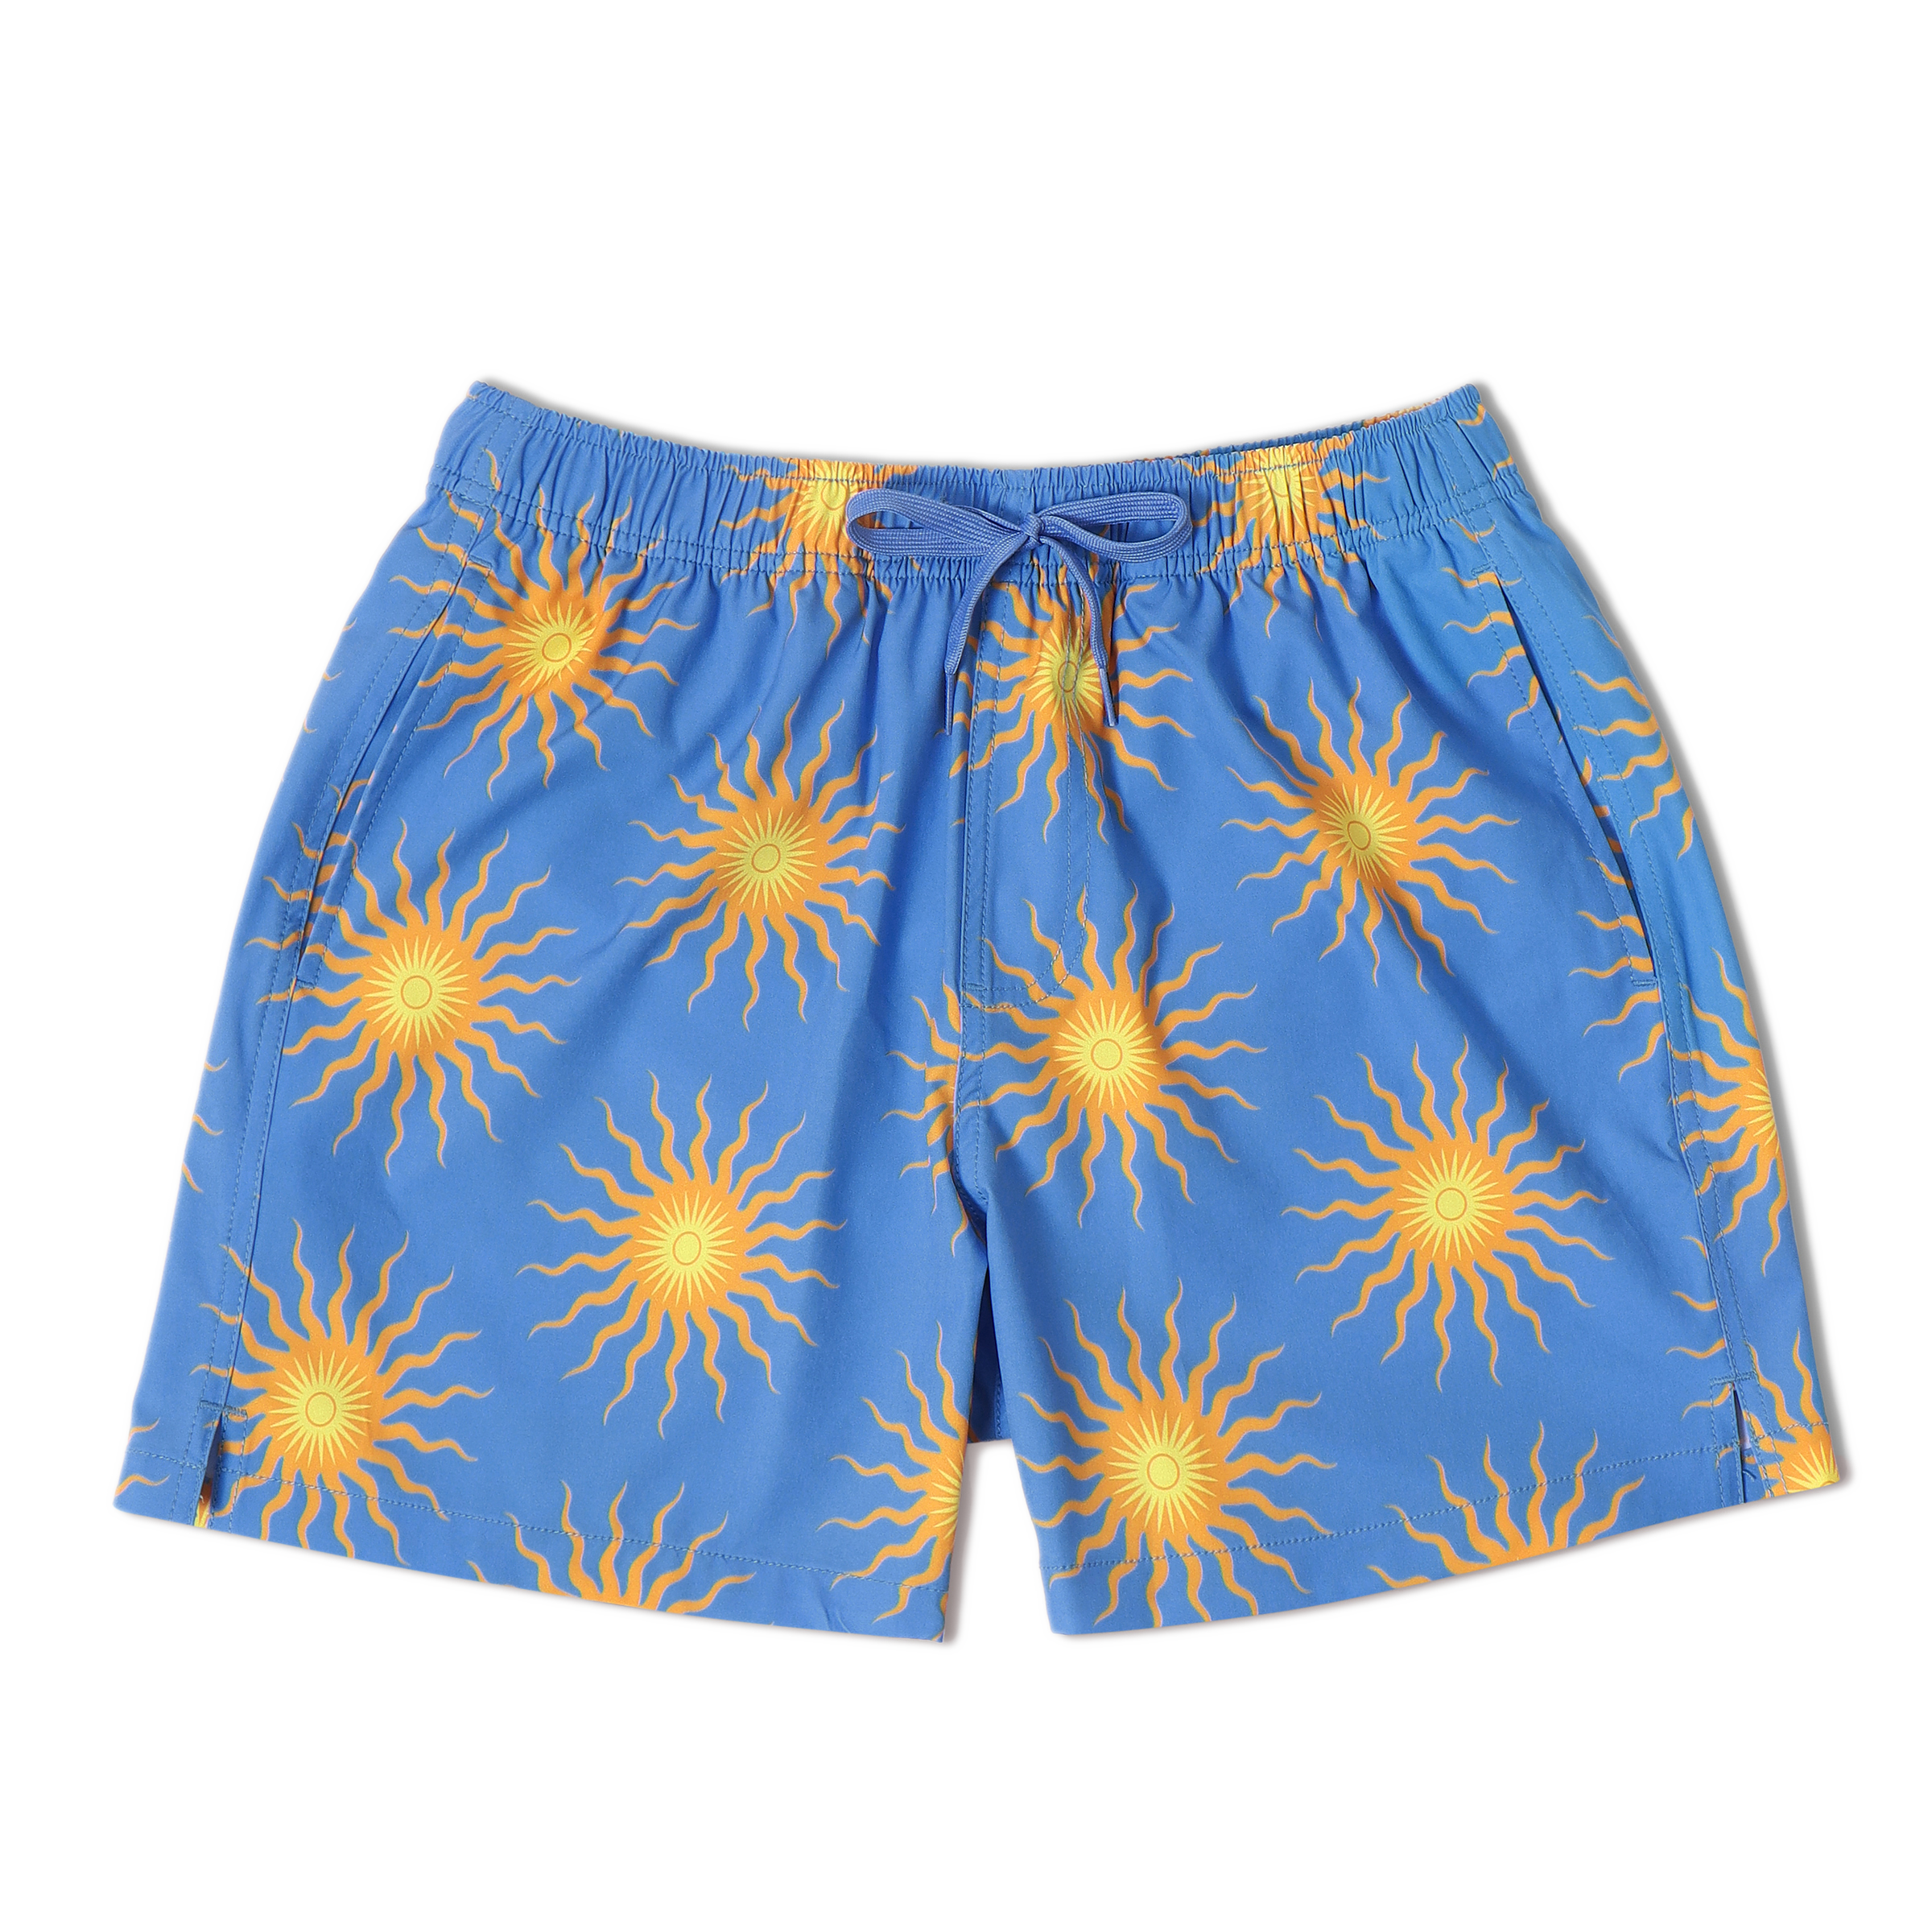 Stretch Swim 5.5" Sunburst front with an elastic waistband, two inseam pockets, and a dyed-to-match drawstring